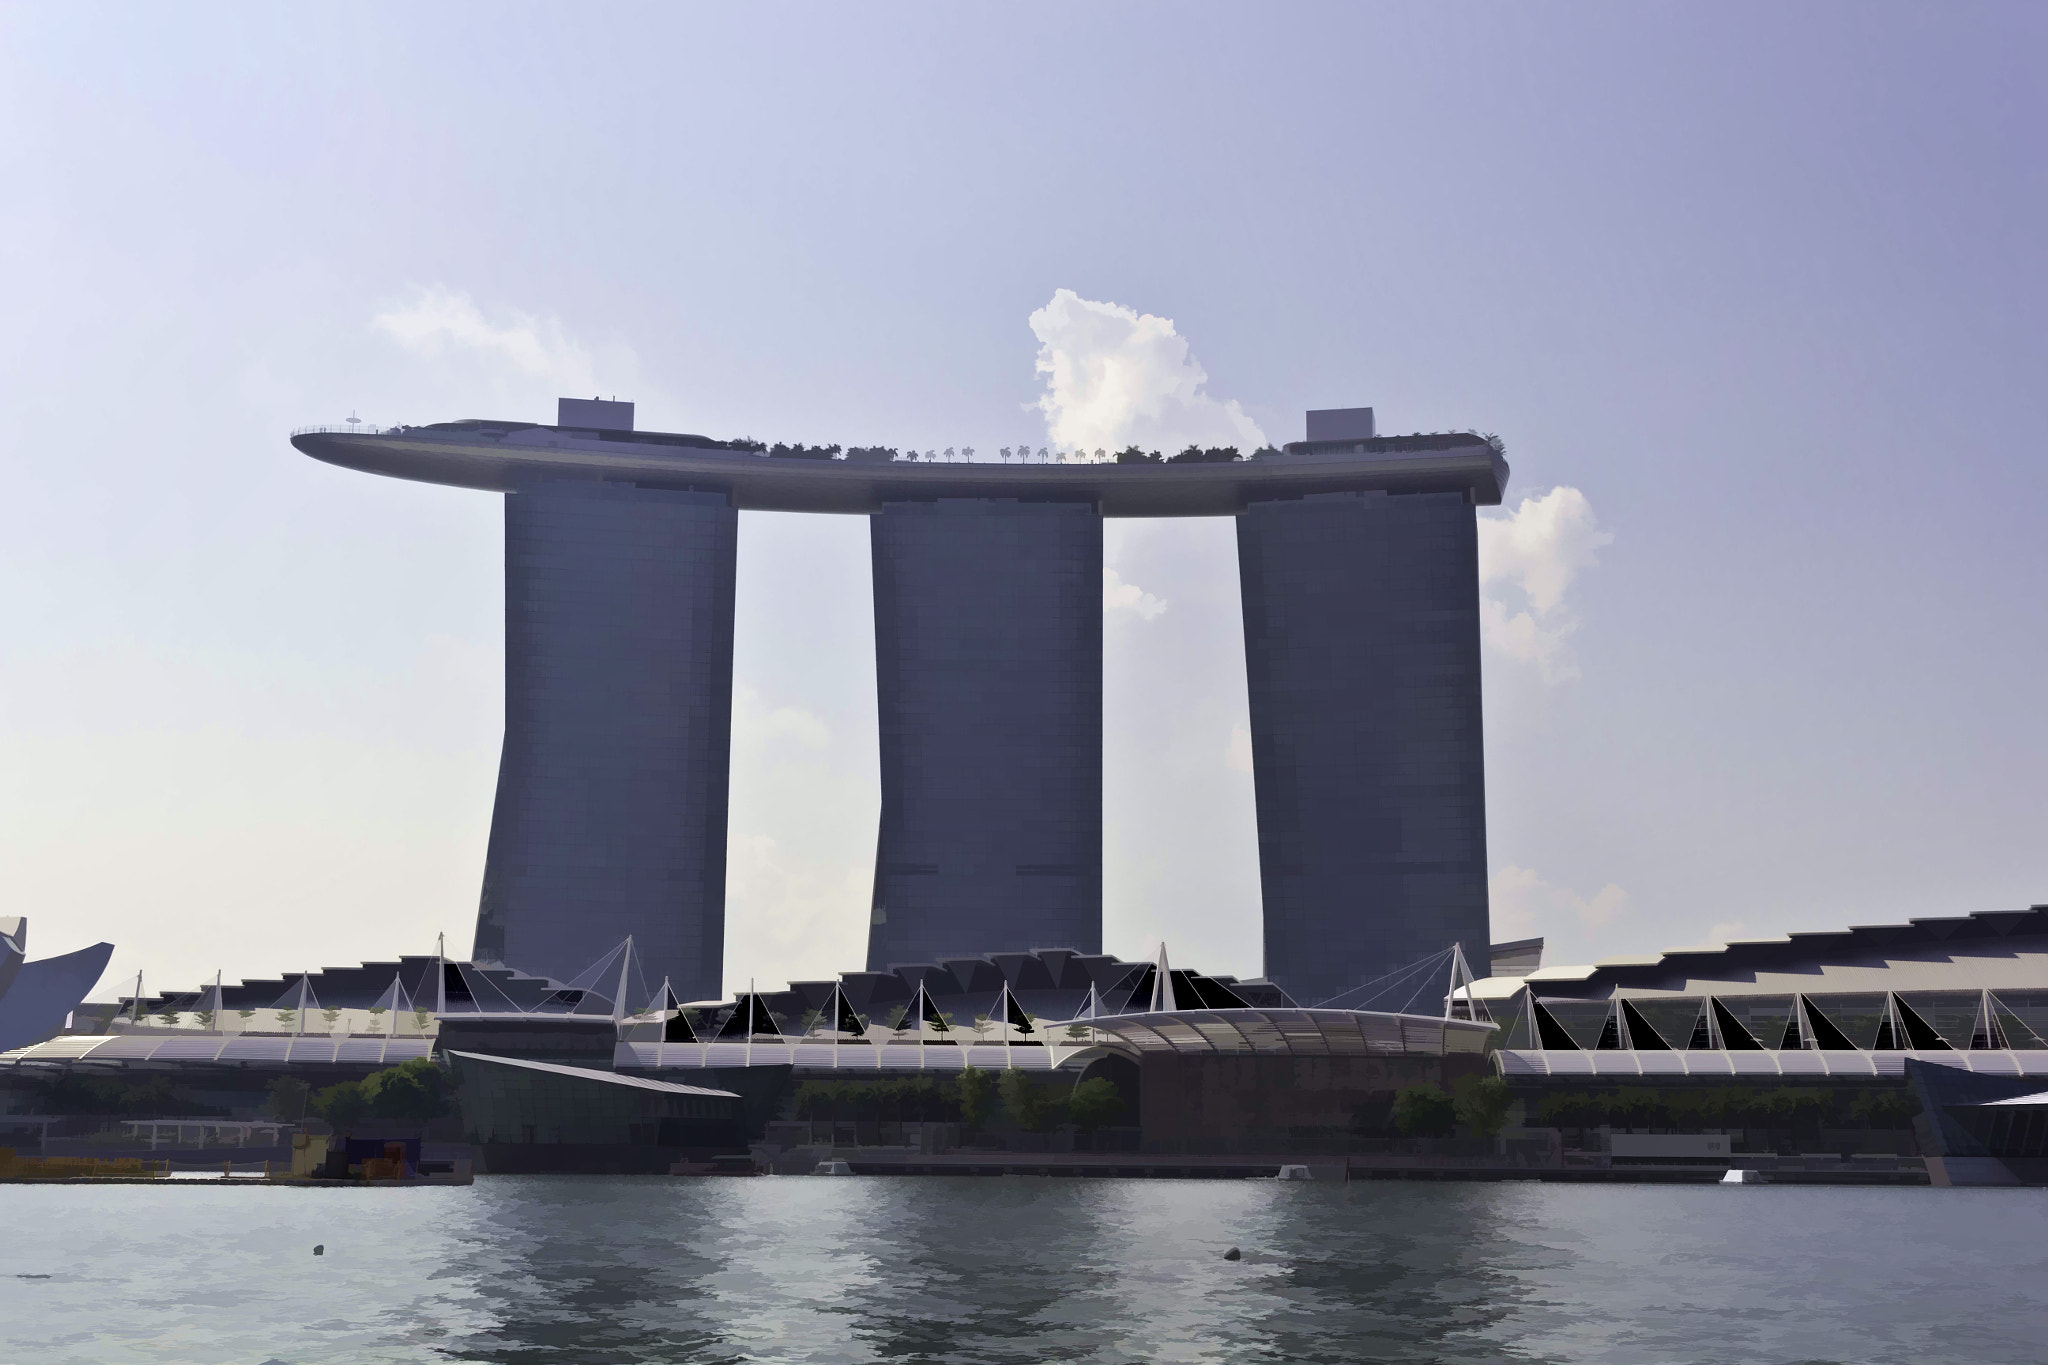 View of the towers of the Marina Bay Sands in Singapore